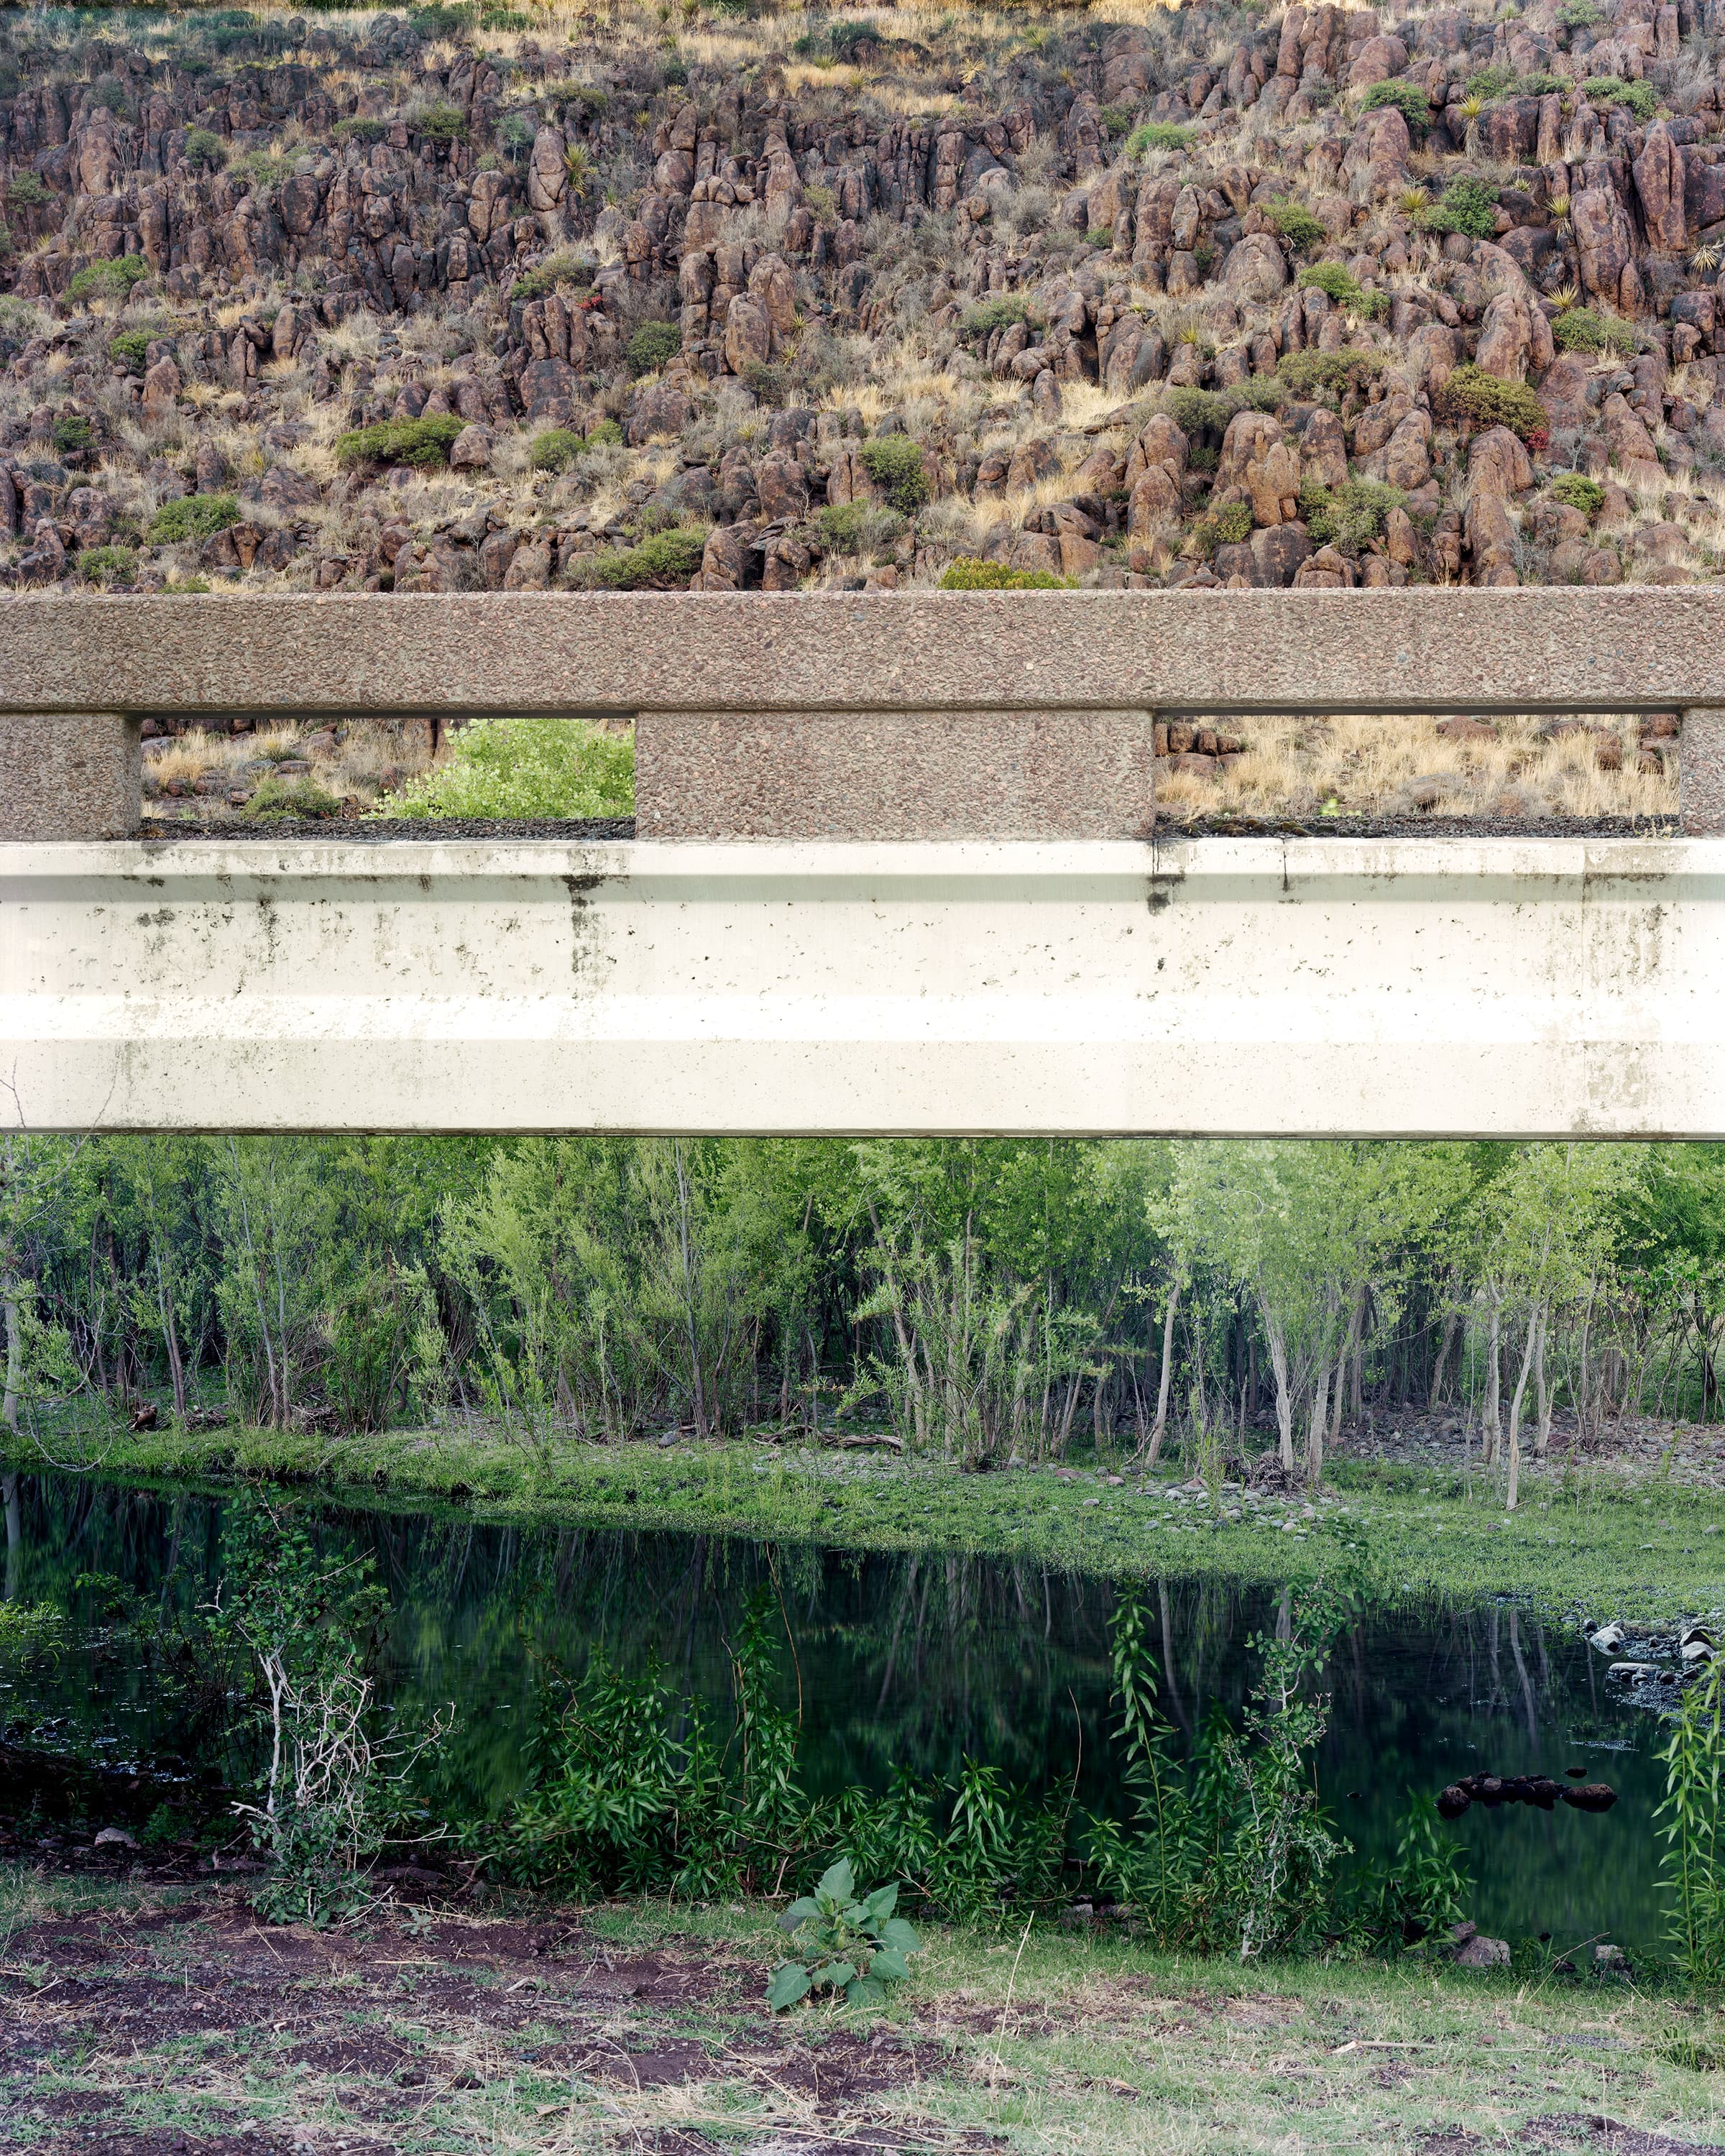 Vertical landscape bisected by elevated highway. The highway divides the picture between the water and greenery below and the dry desert landscape above.